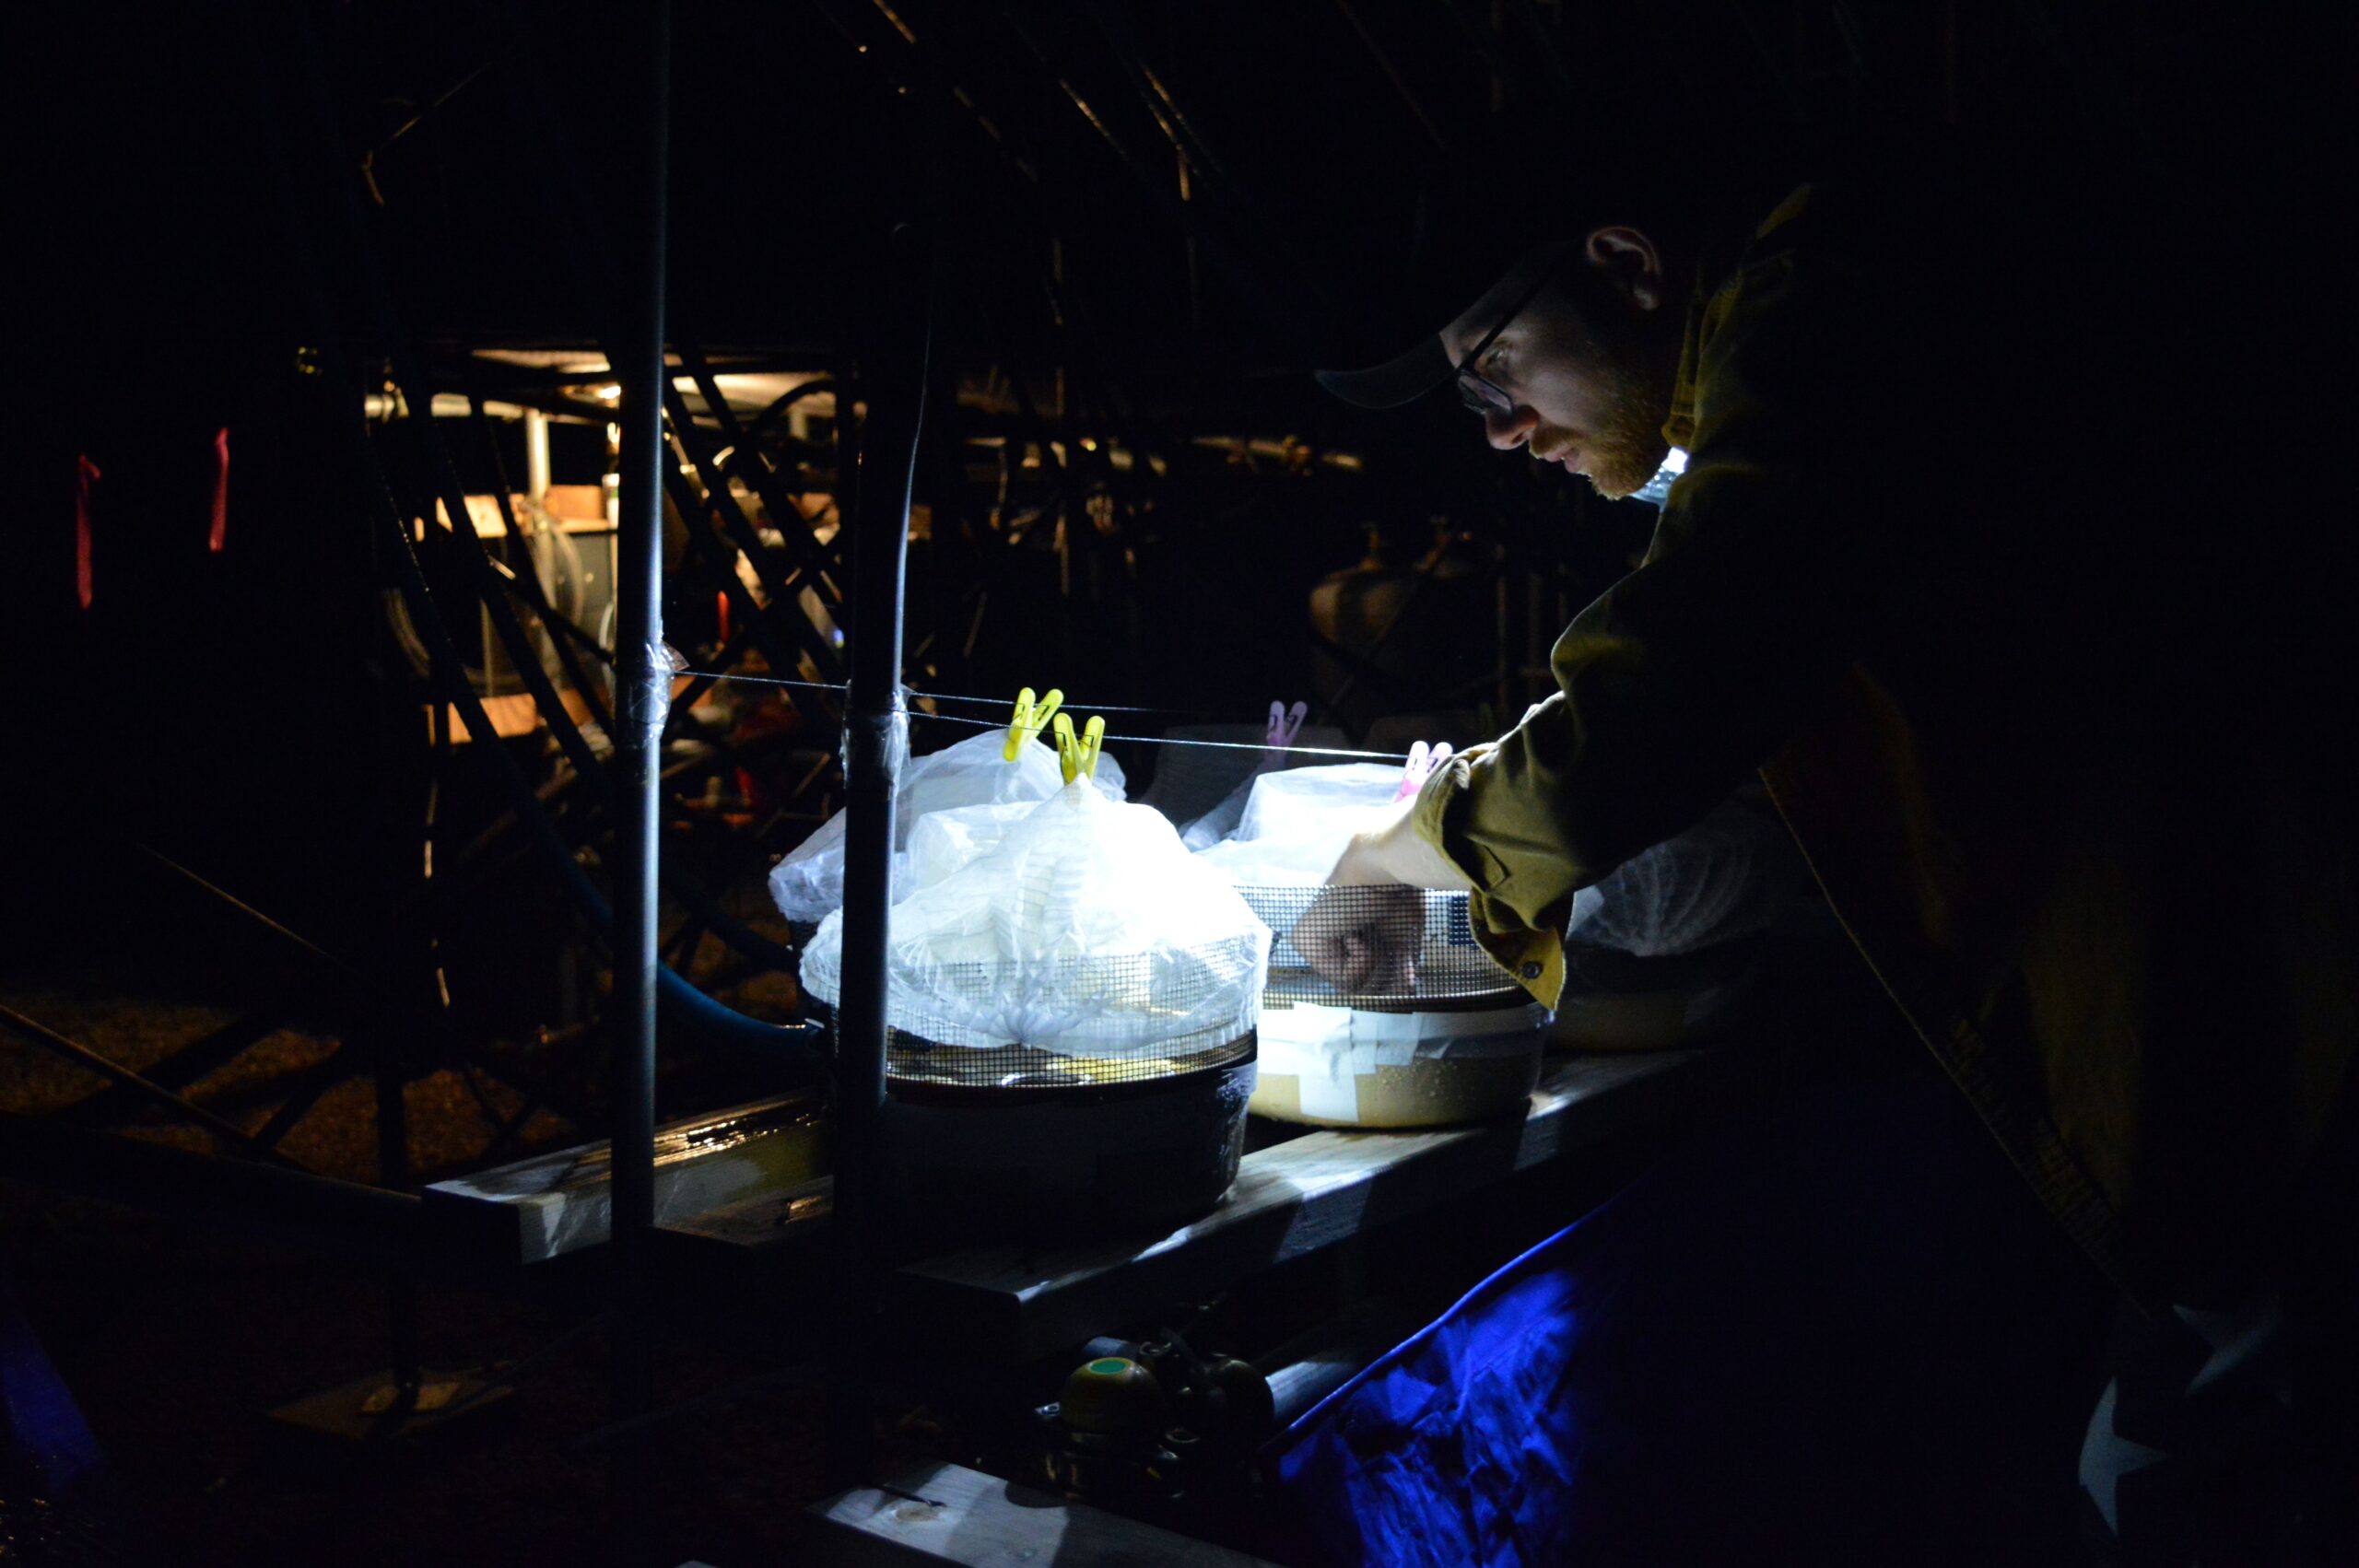 Sam Ross conducting an experiment at the Tomakomai Experimental Forest for his PhD research, as part of his research stay as a National Geographic Early Career grantee during the summer of 2019 (Photo by Samuel Ross)